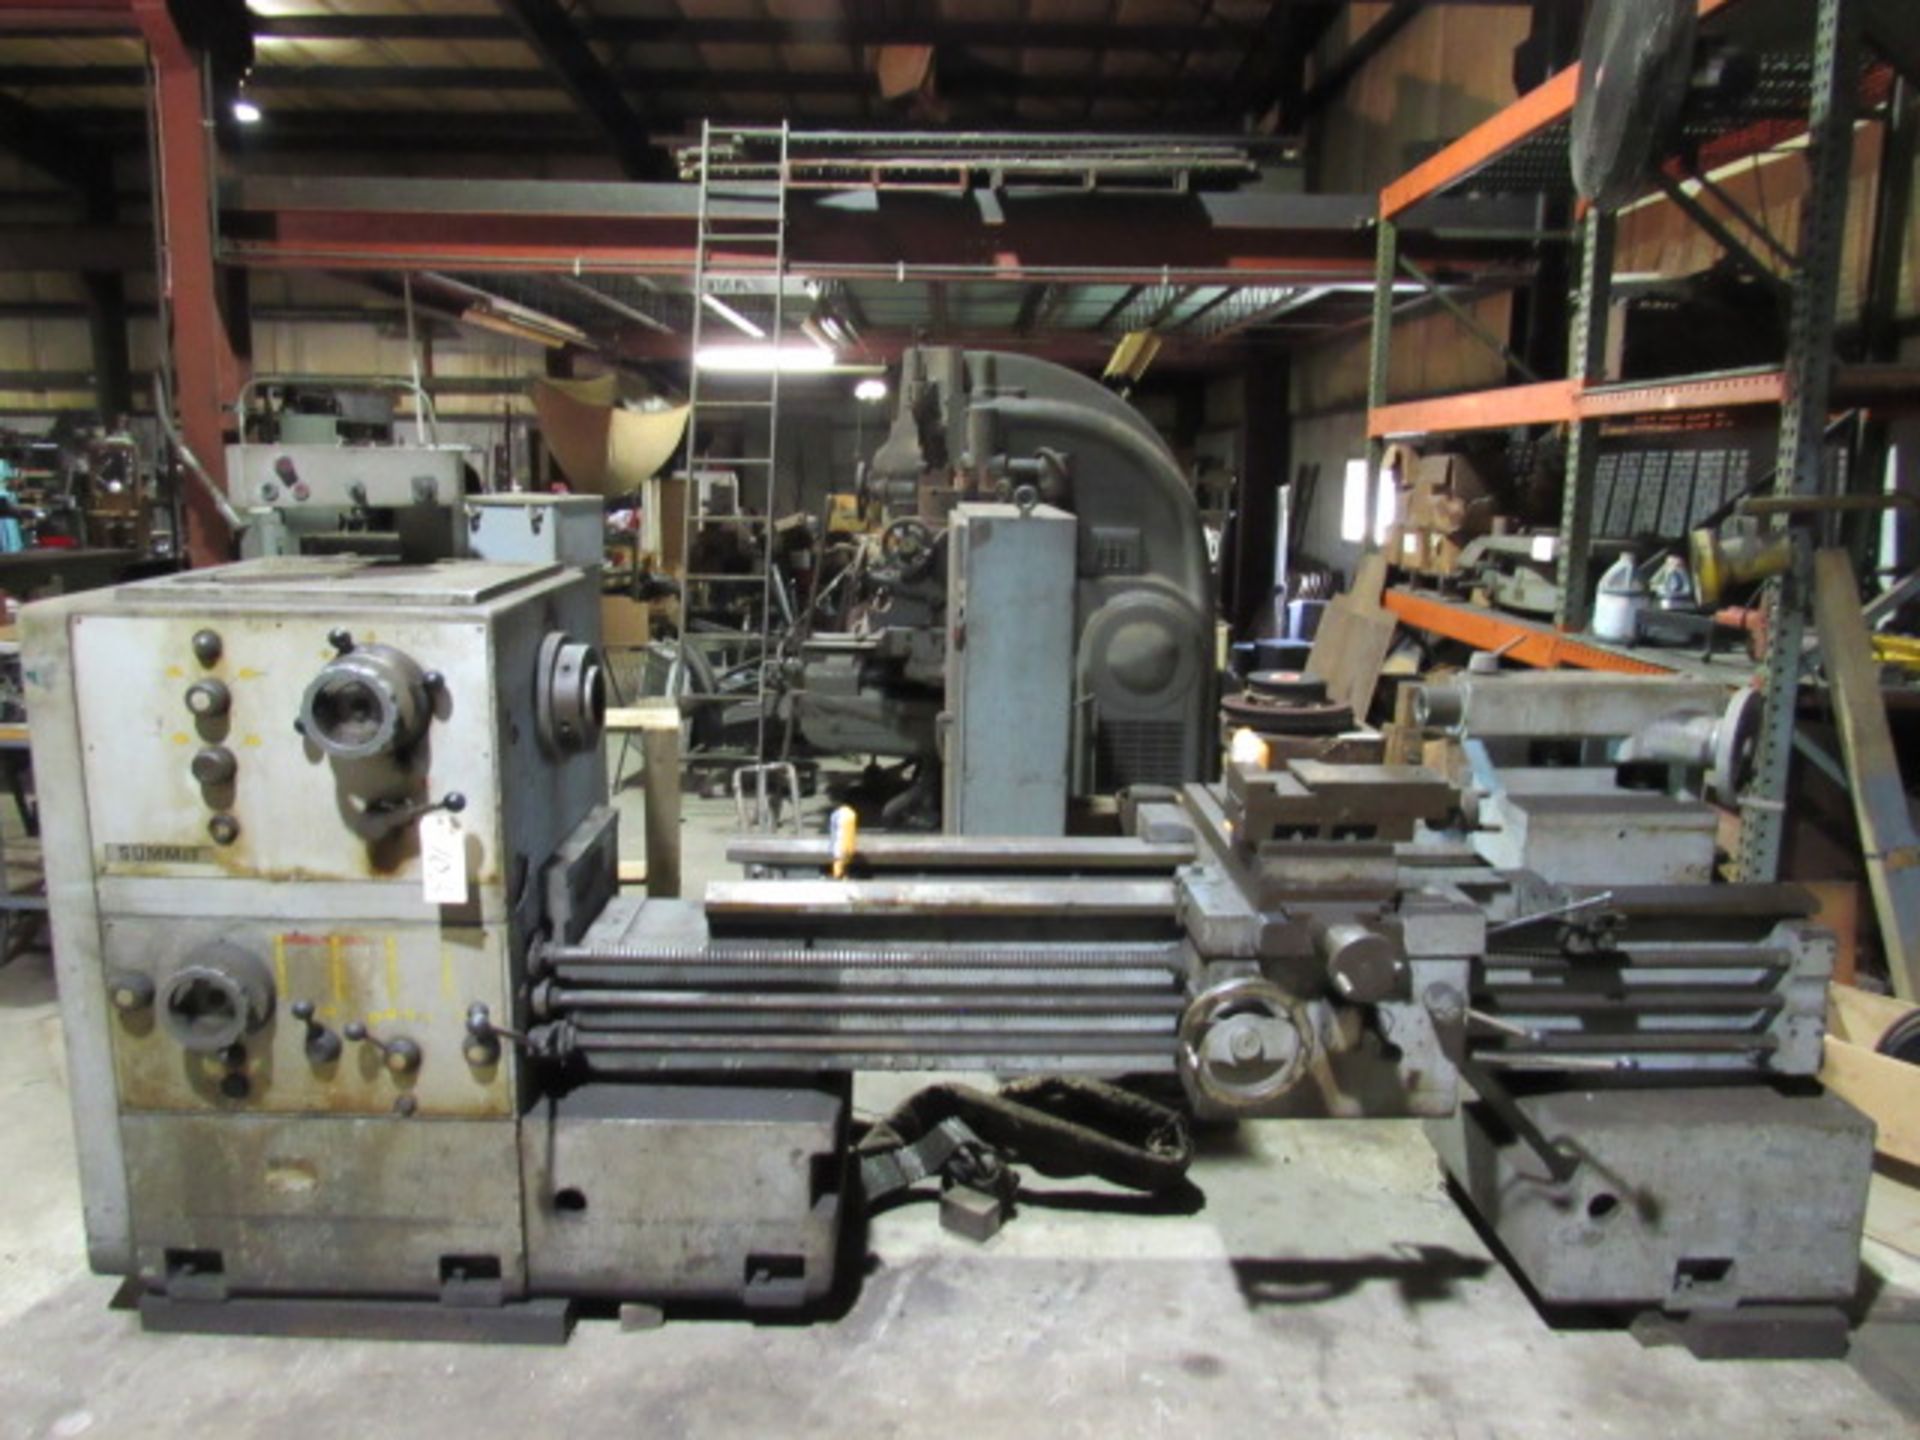 Summit 26-4x60 Gap Bed Engine Lathe with 80'' Centers, Inch / Metric, Spindle Speeds to 1010 RPM,